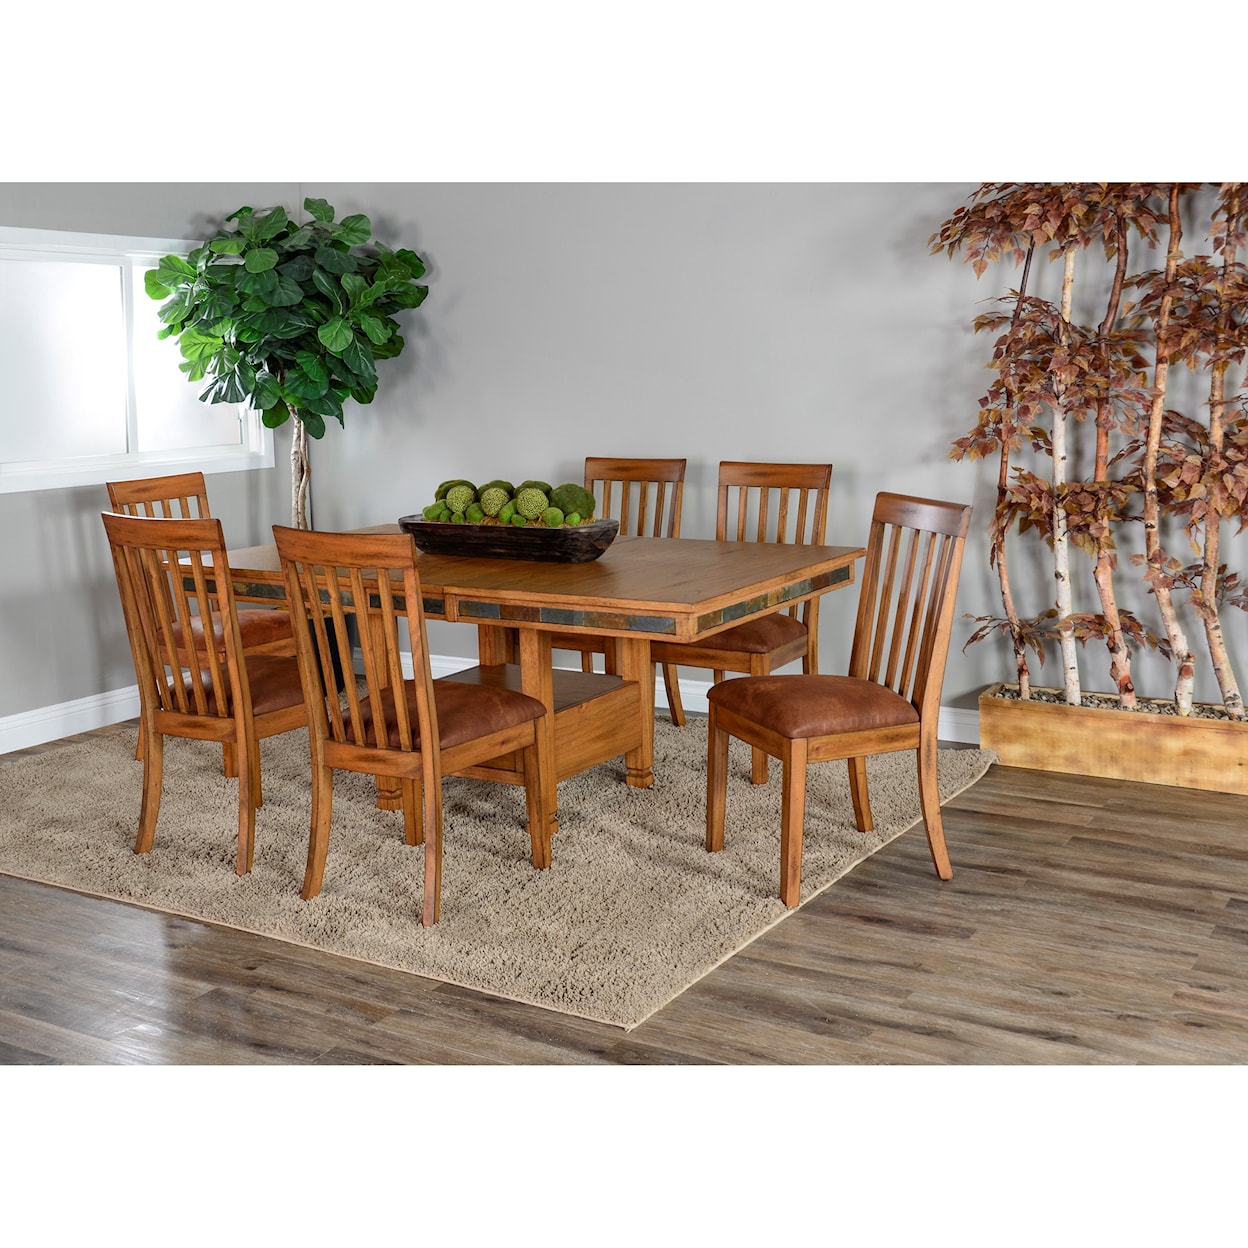 Sunny Designs Sedona 2 Dining Table and Chair Set